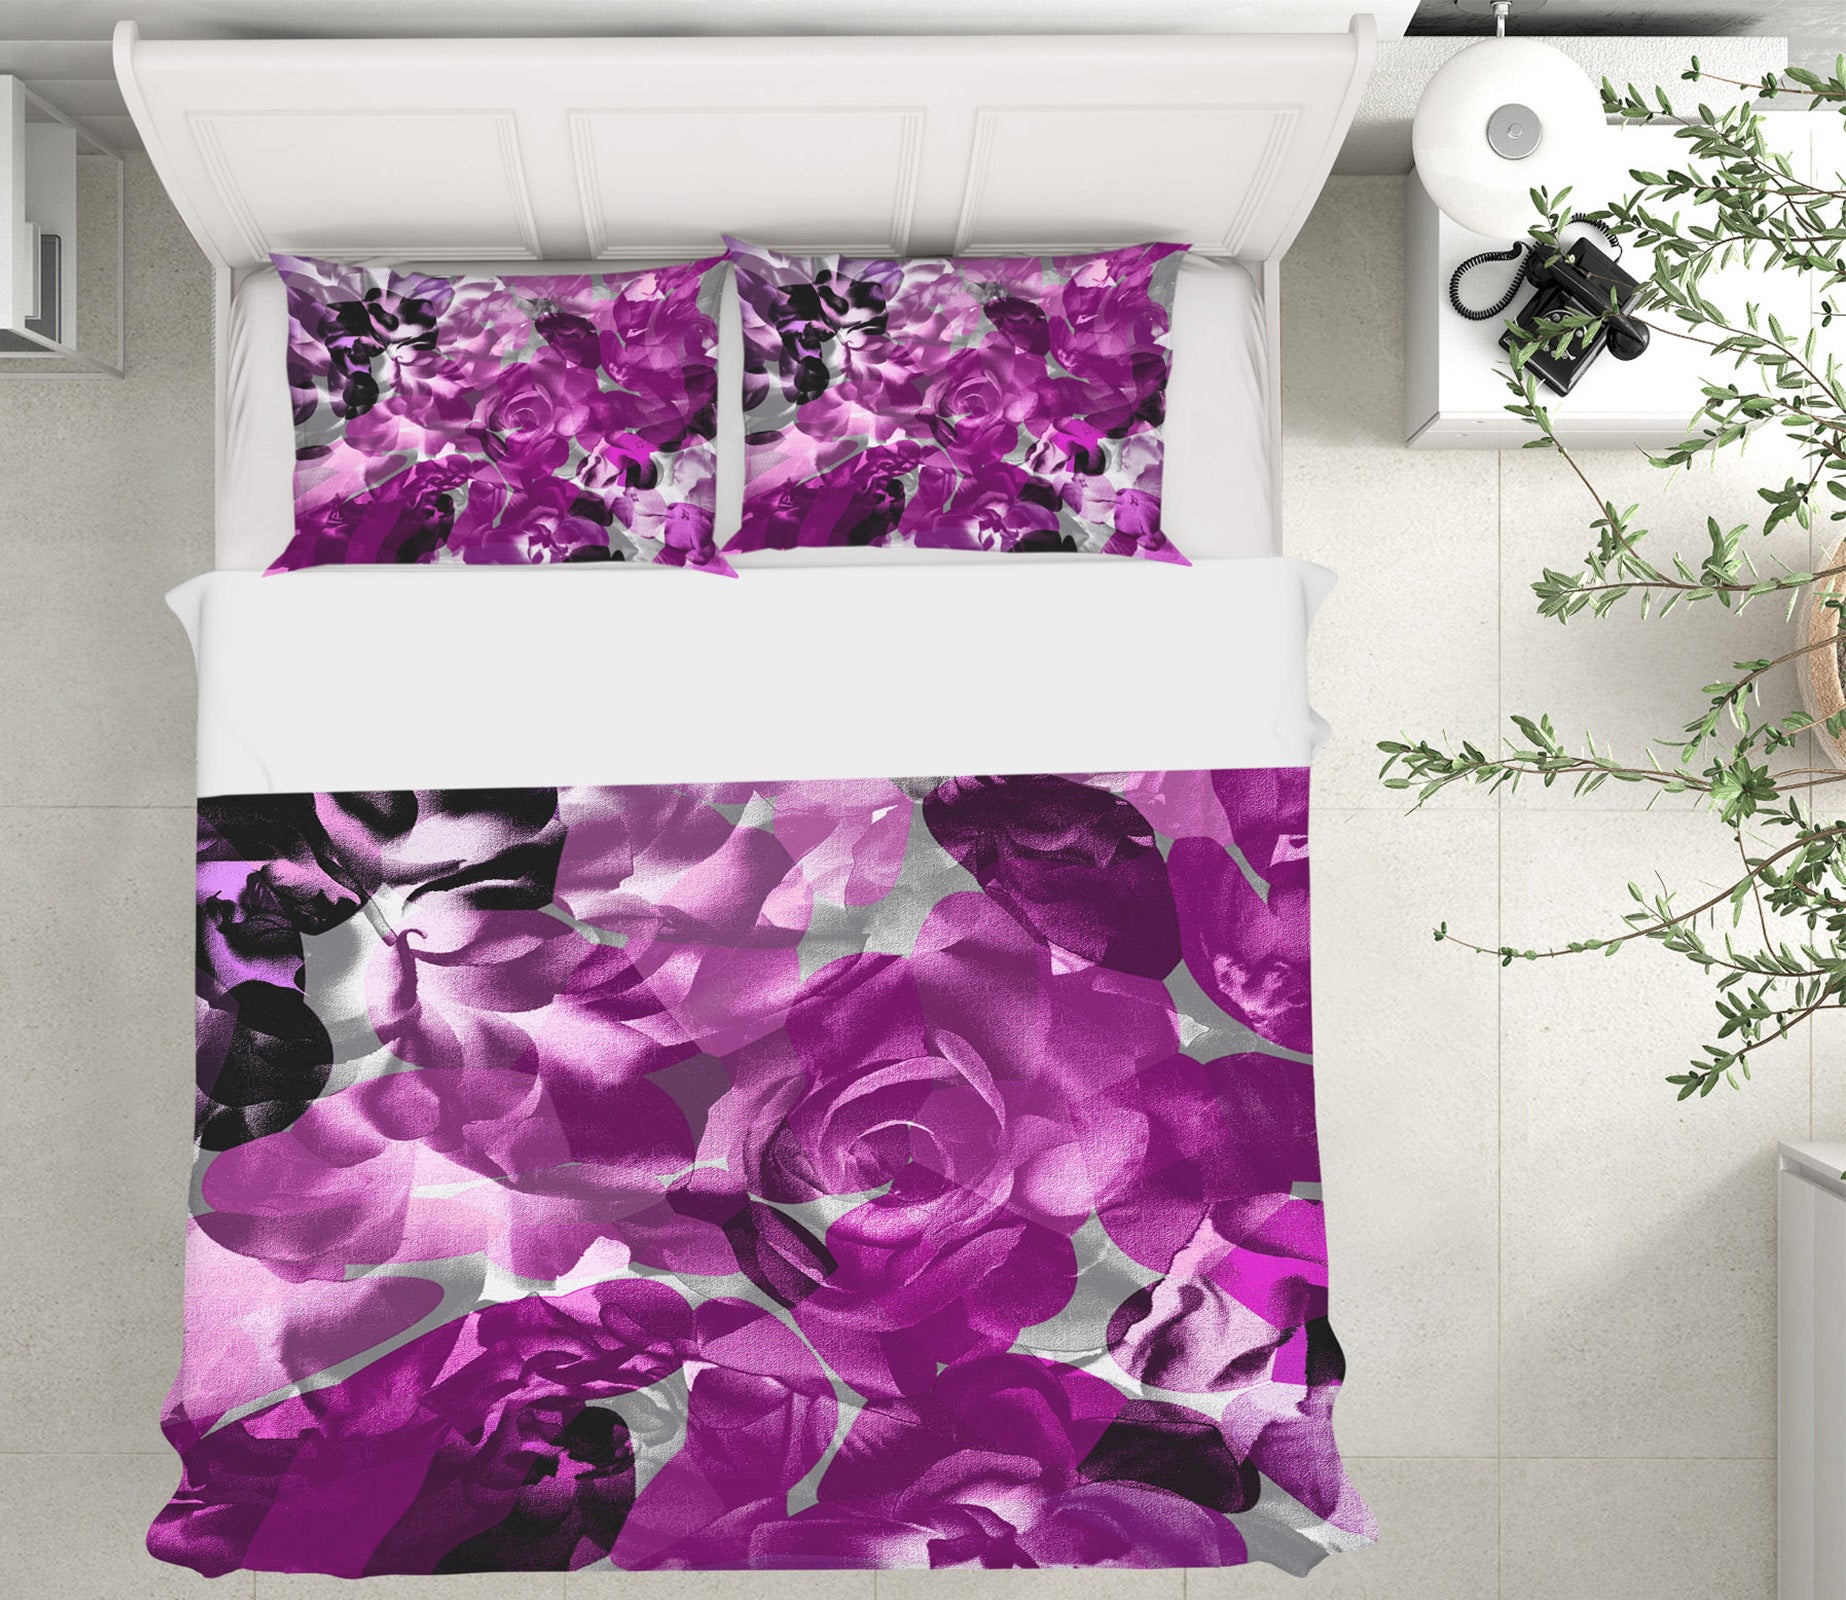 3D Purple Flowers 19128 Shandra Smith Bedding Bed Pillowcases Quilt